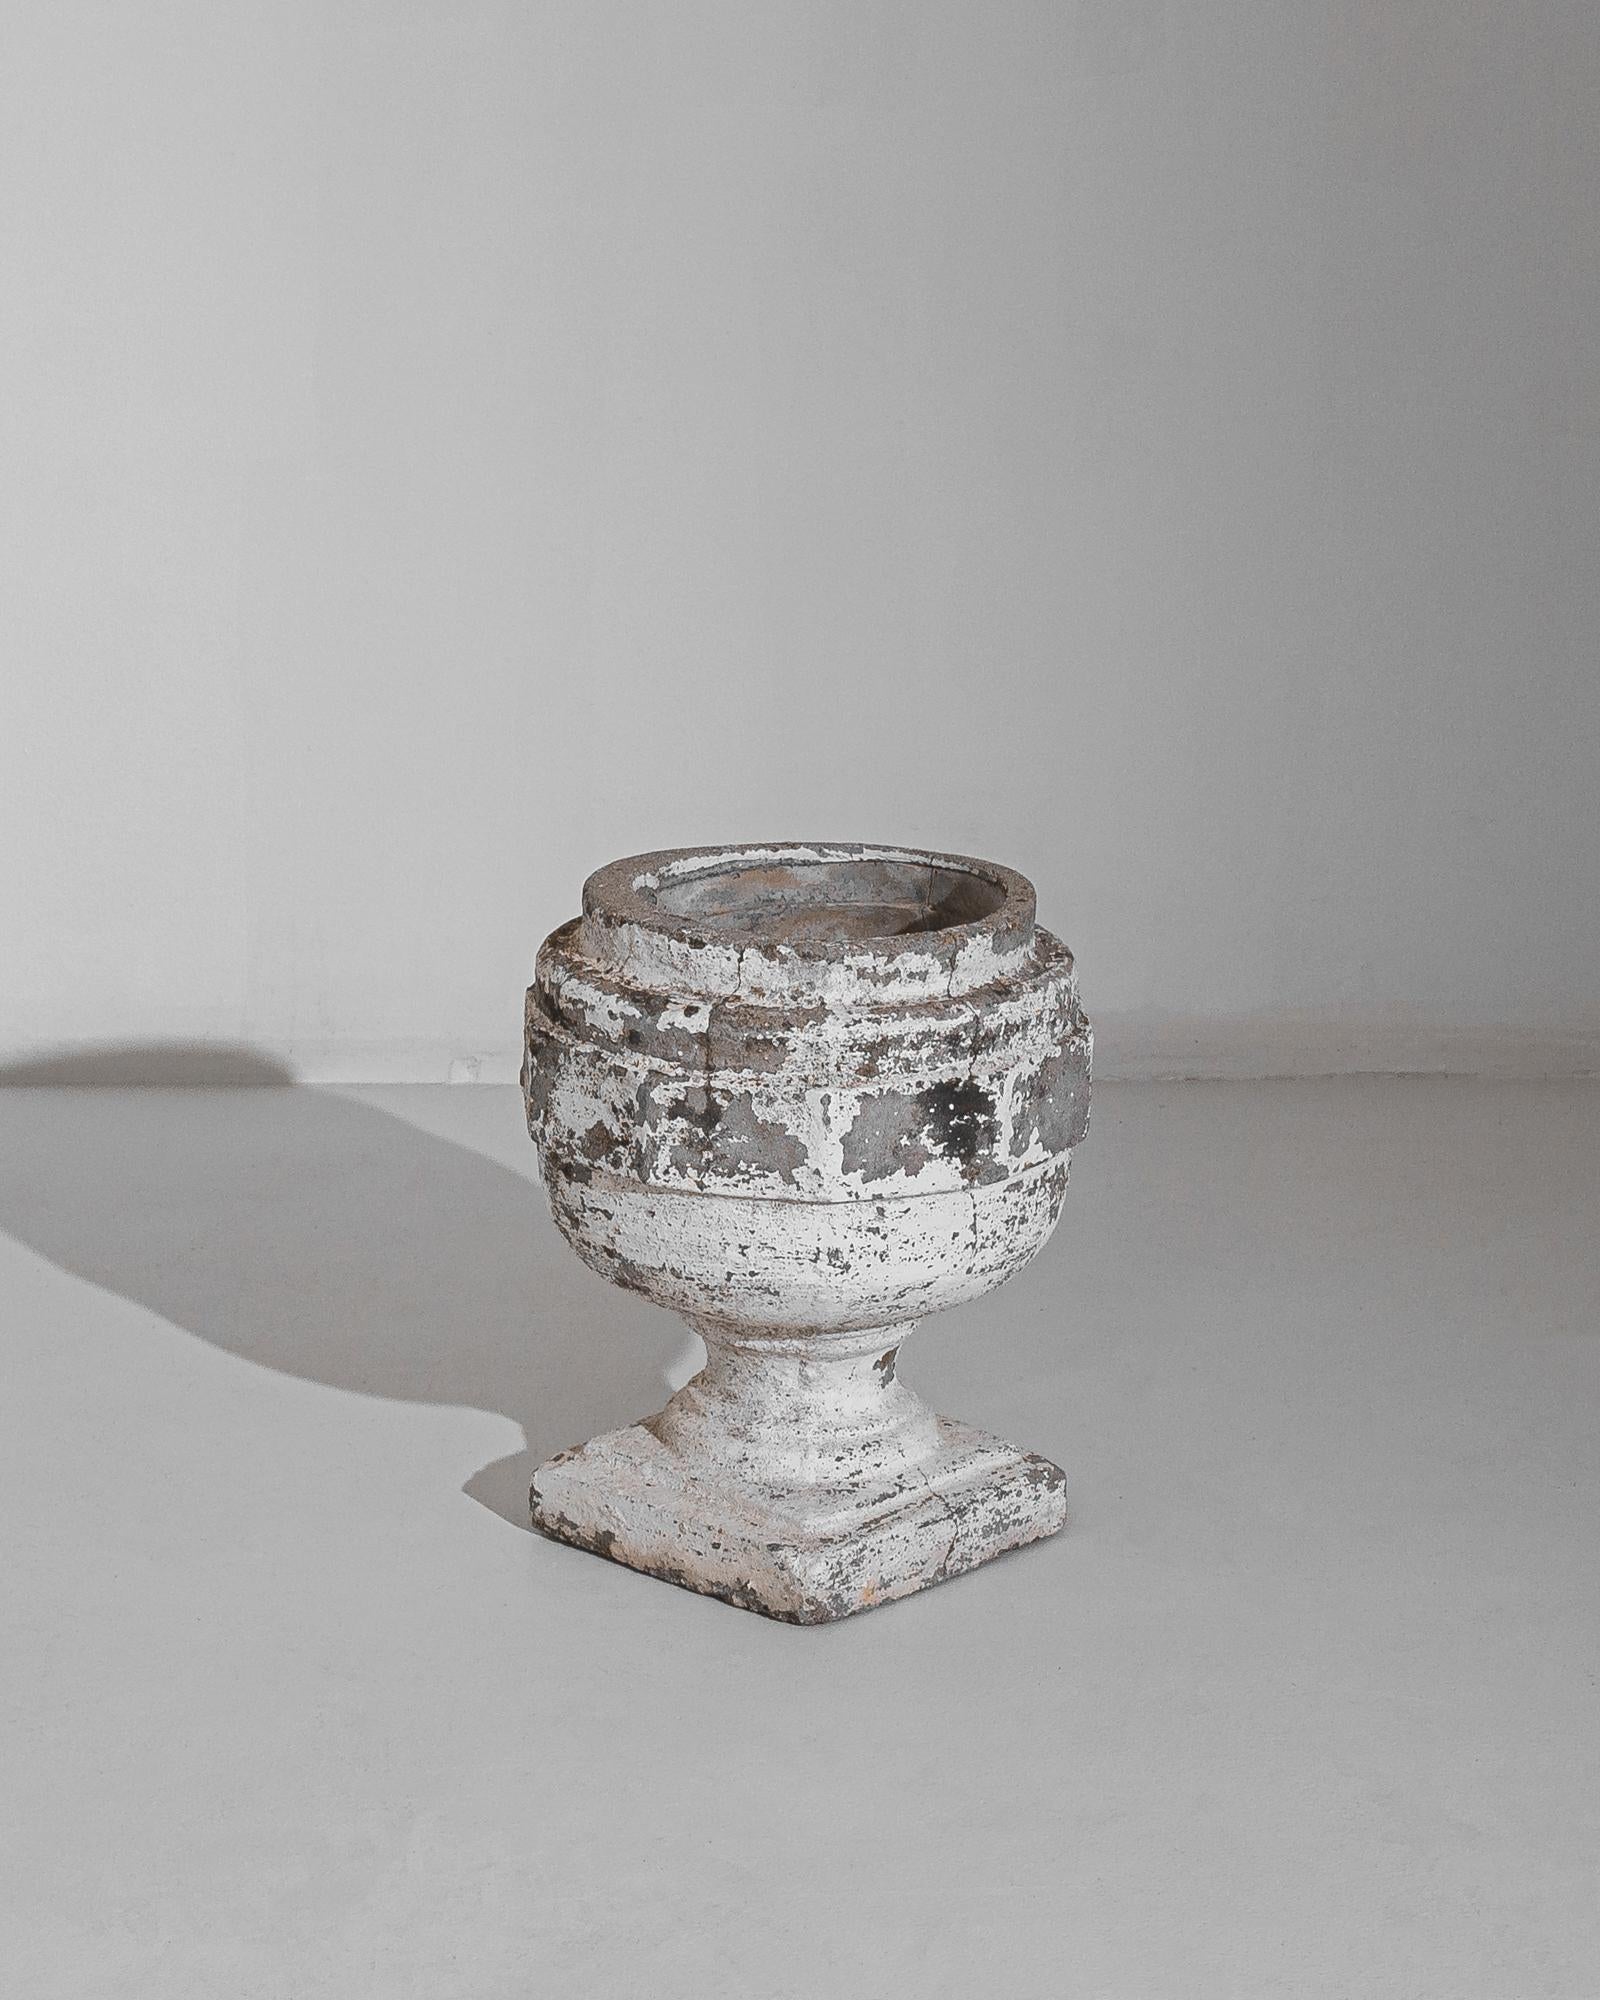 This concrete planter was made in France, circa 1960. The full rounded body recalls a goblet resting on a stepped square plinth. Beautifully weathered with vestiges of white paint on its gravelly surface, this planter will be a choice display piece